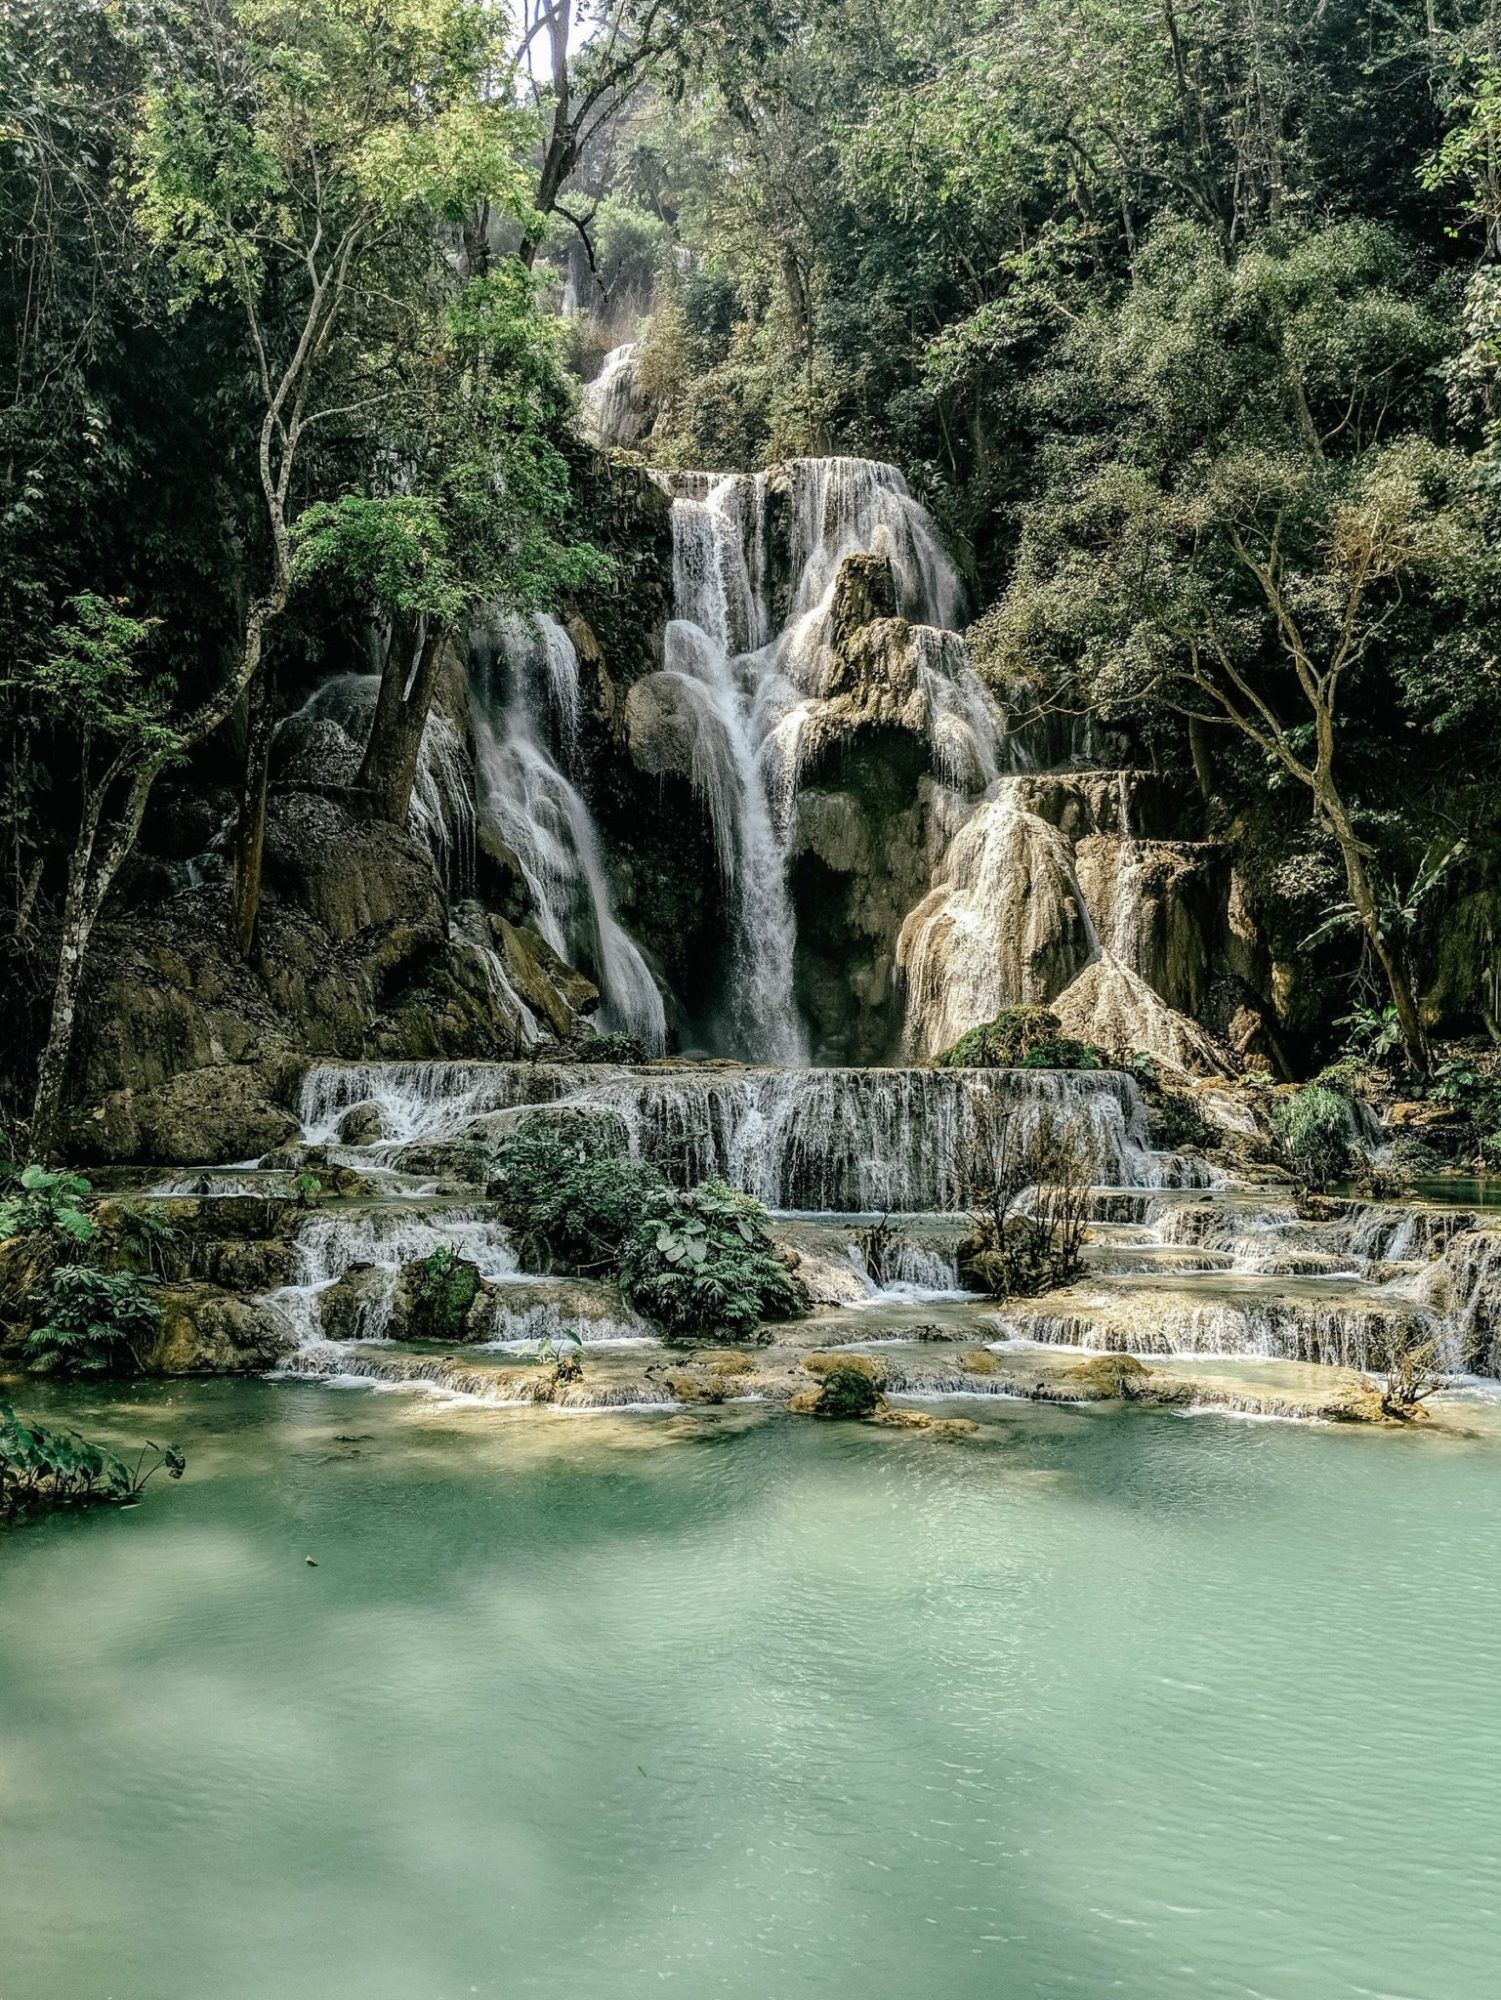 The amazingly magnificent Kuang Si Falls in Laos